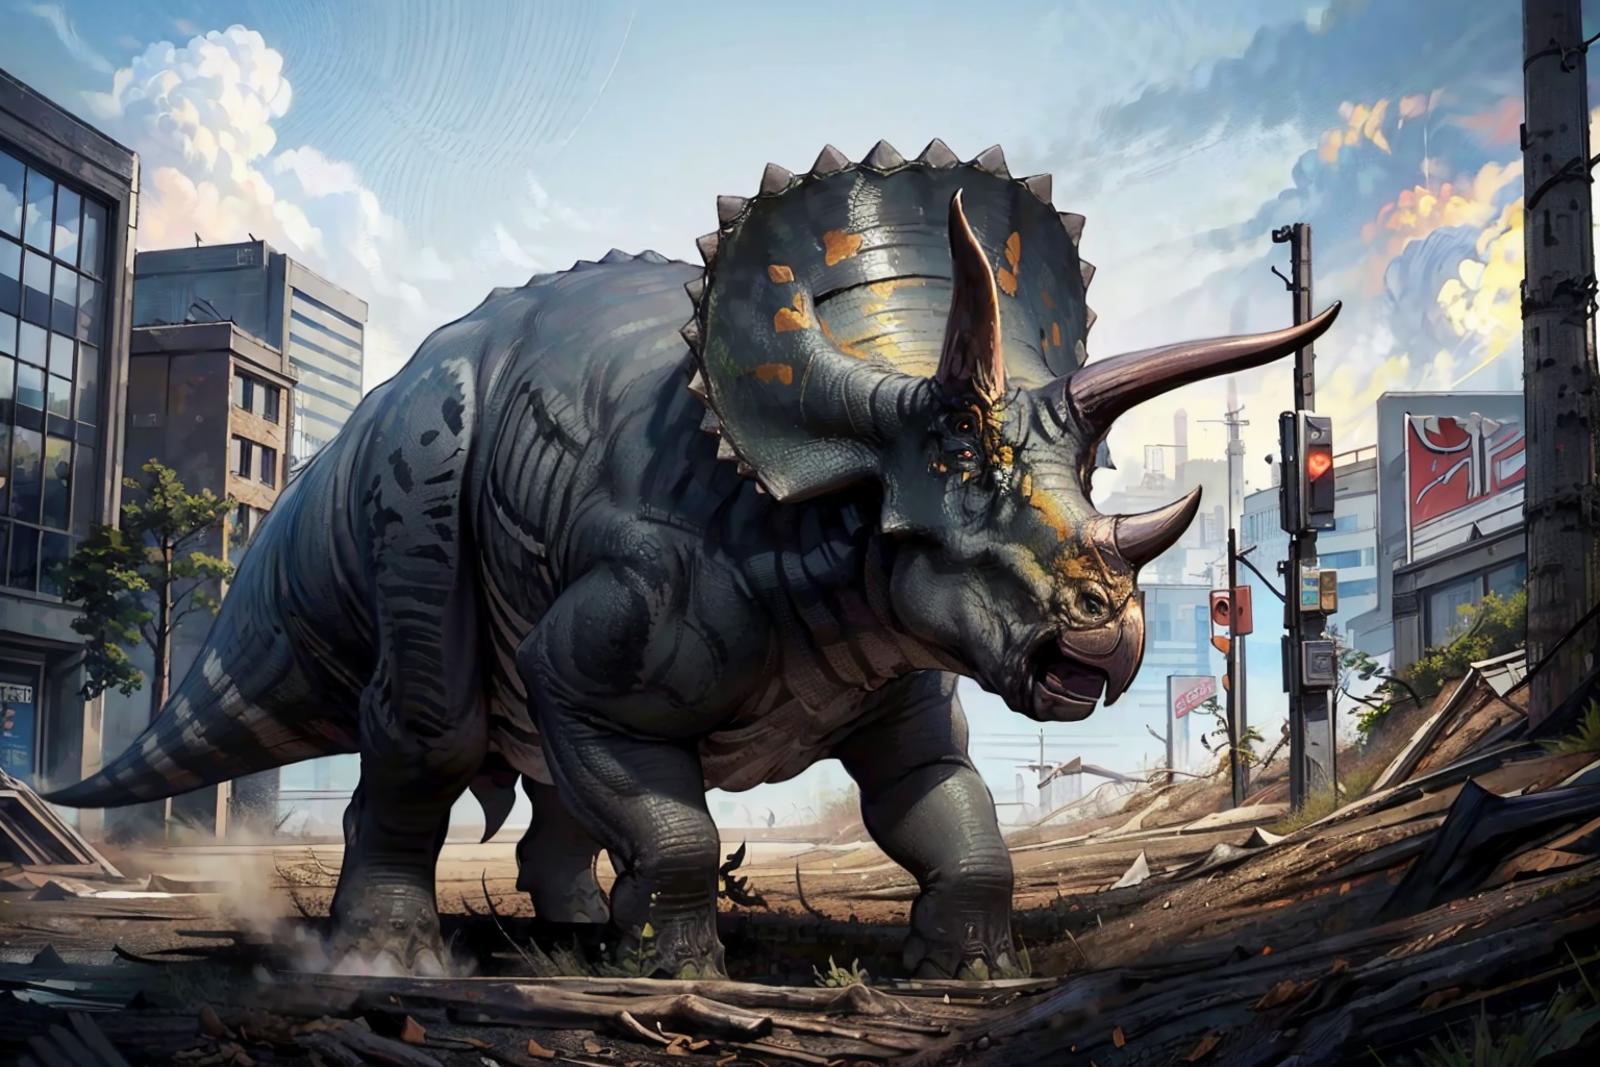 [Experimental] Triceratops (Dinosaur) image by novowels